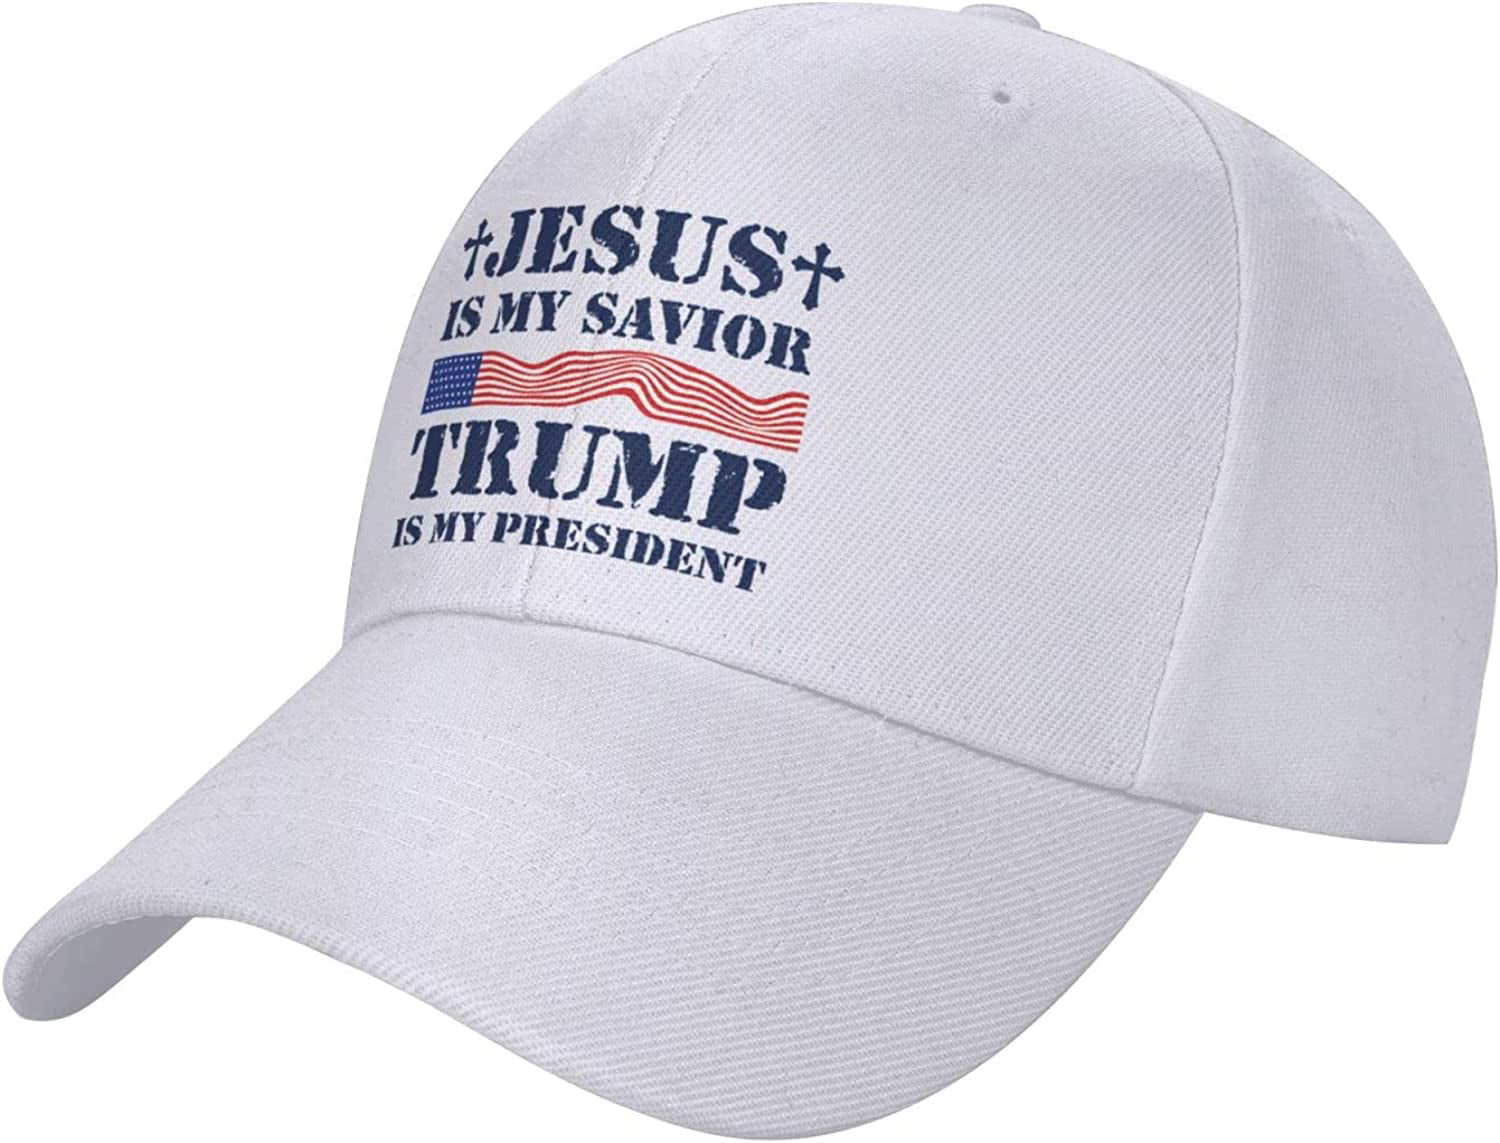 Funny Baseball Caps for Men Je-sus is My Savior Trump is My President ...